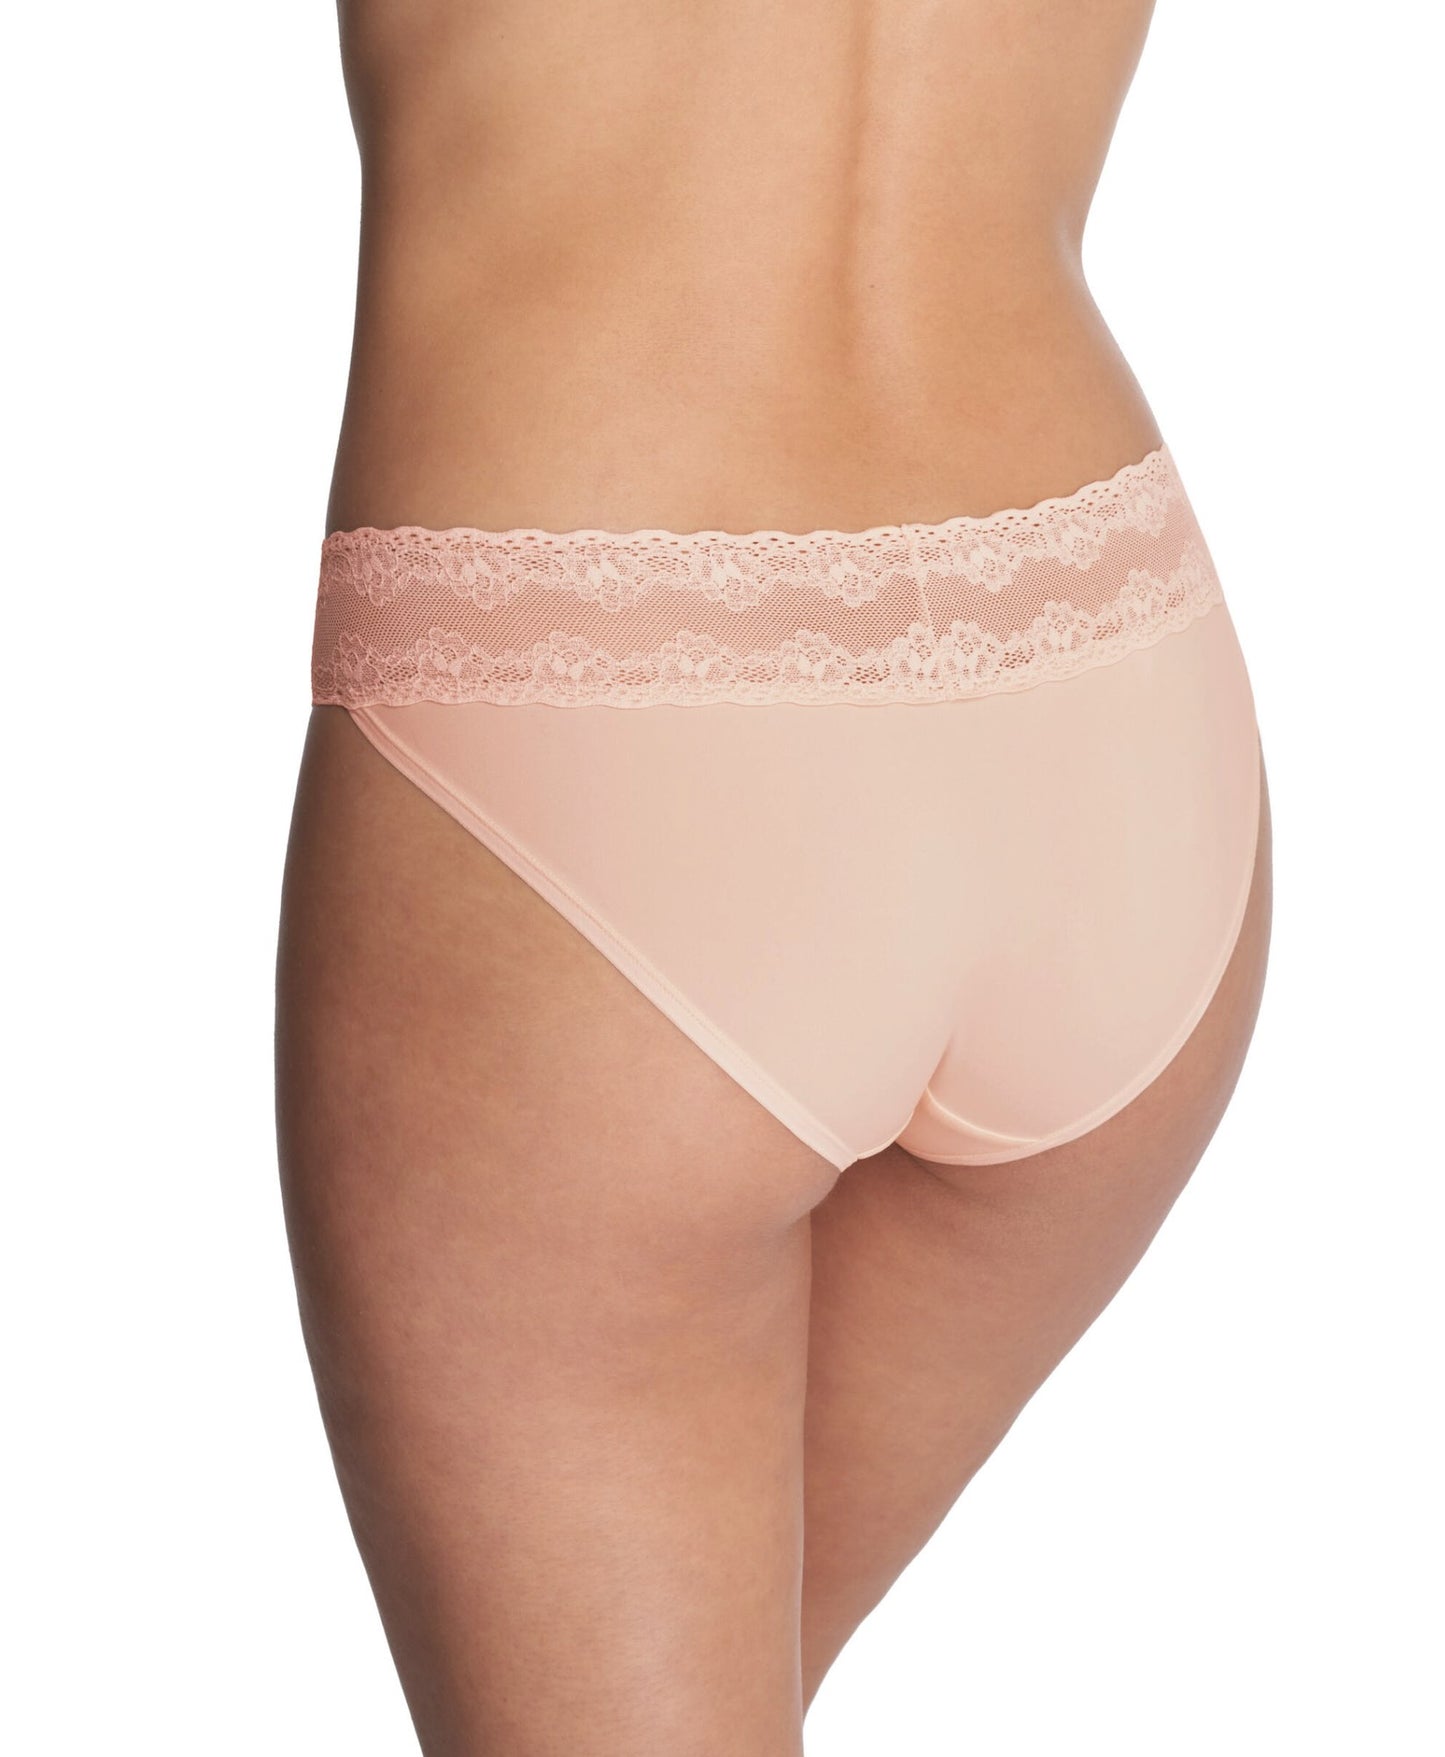 Bliss Perfection vikini - new spring color